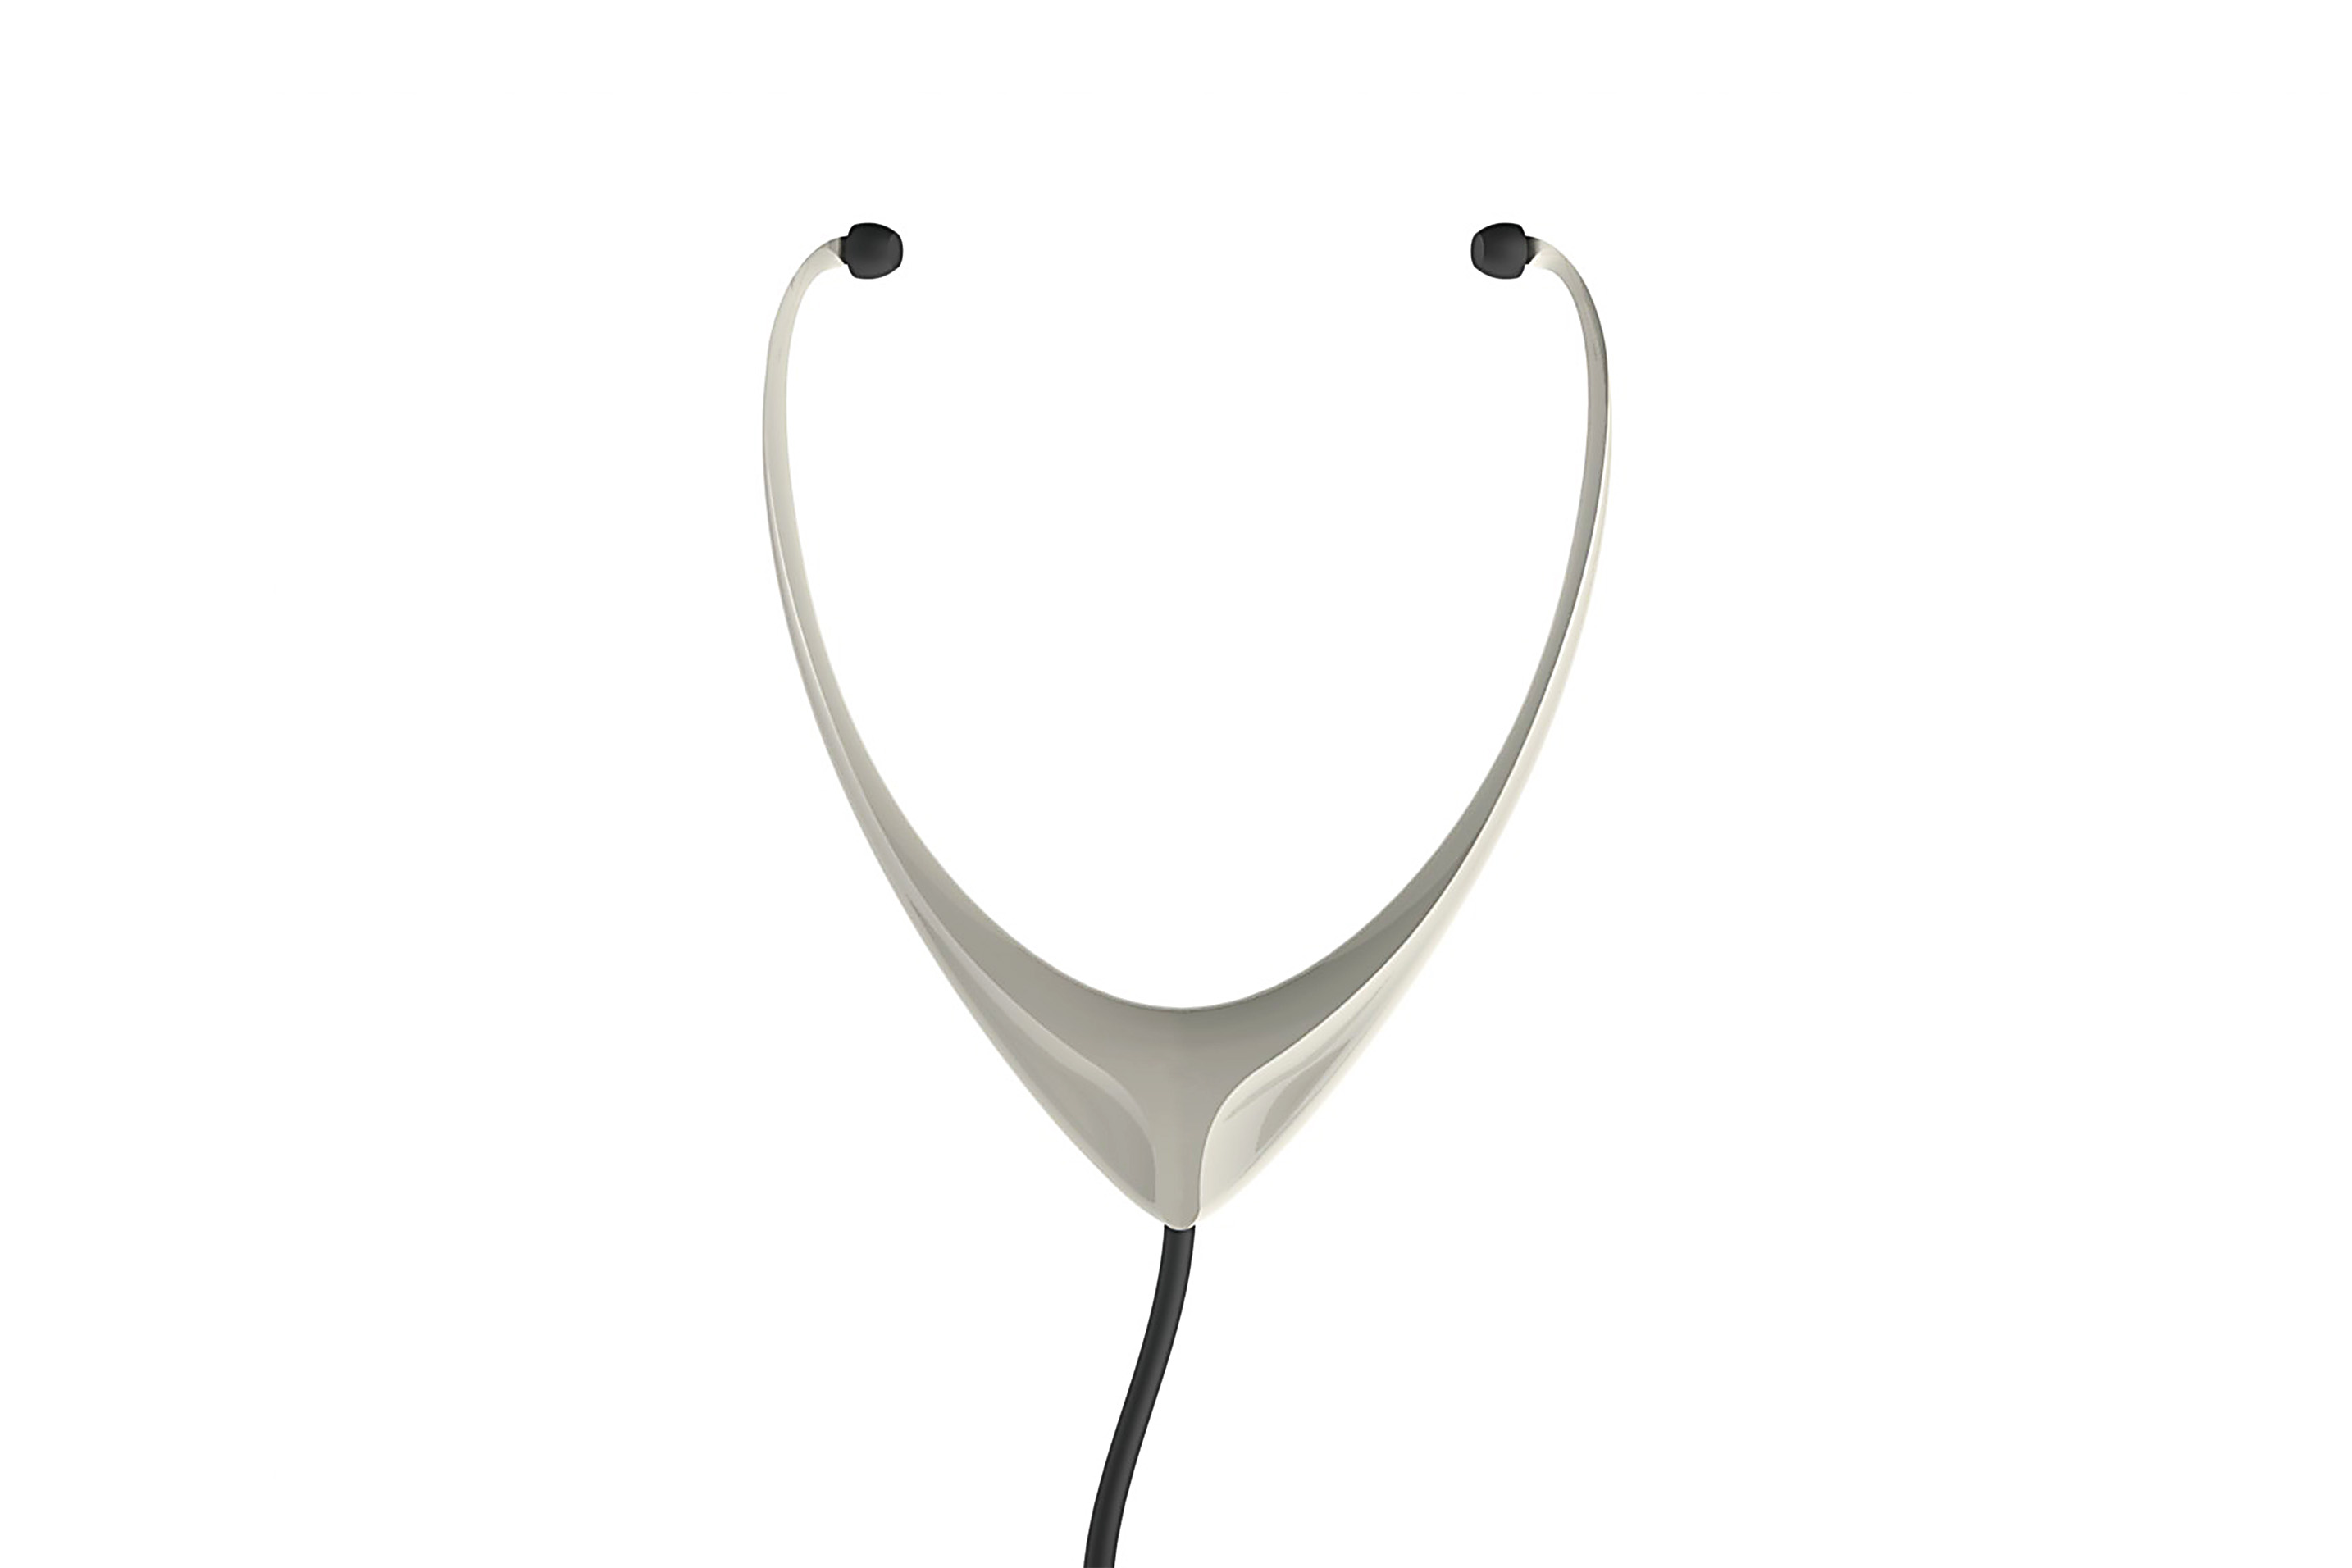 Stethoscope-shaped headphones inspired by the head and horns of an oryx.